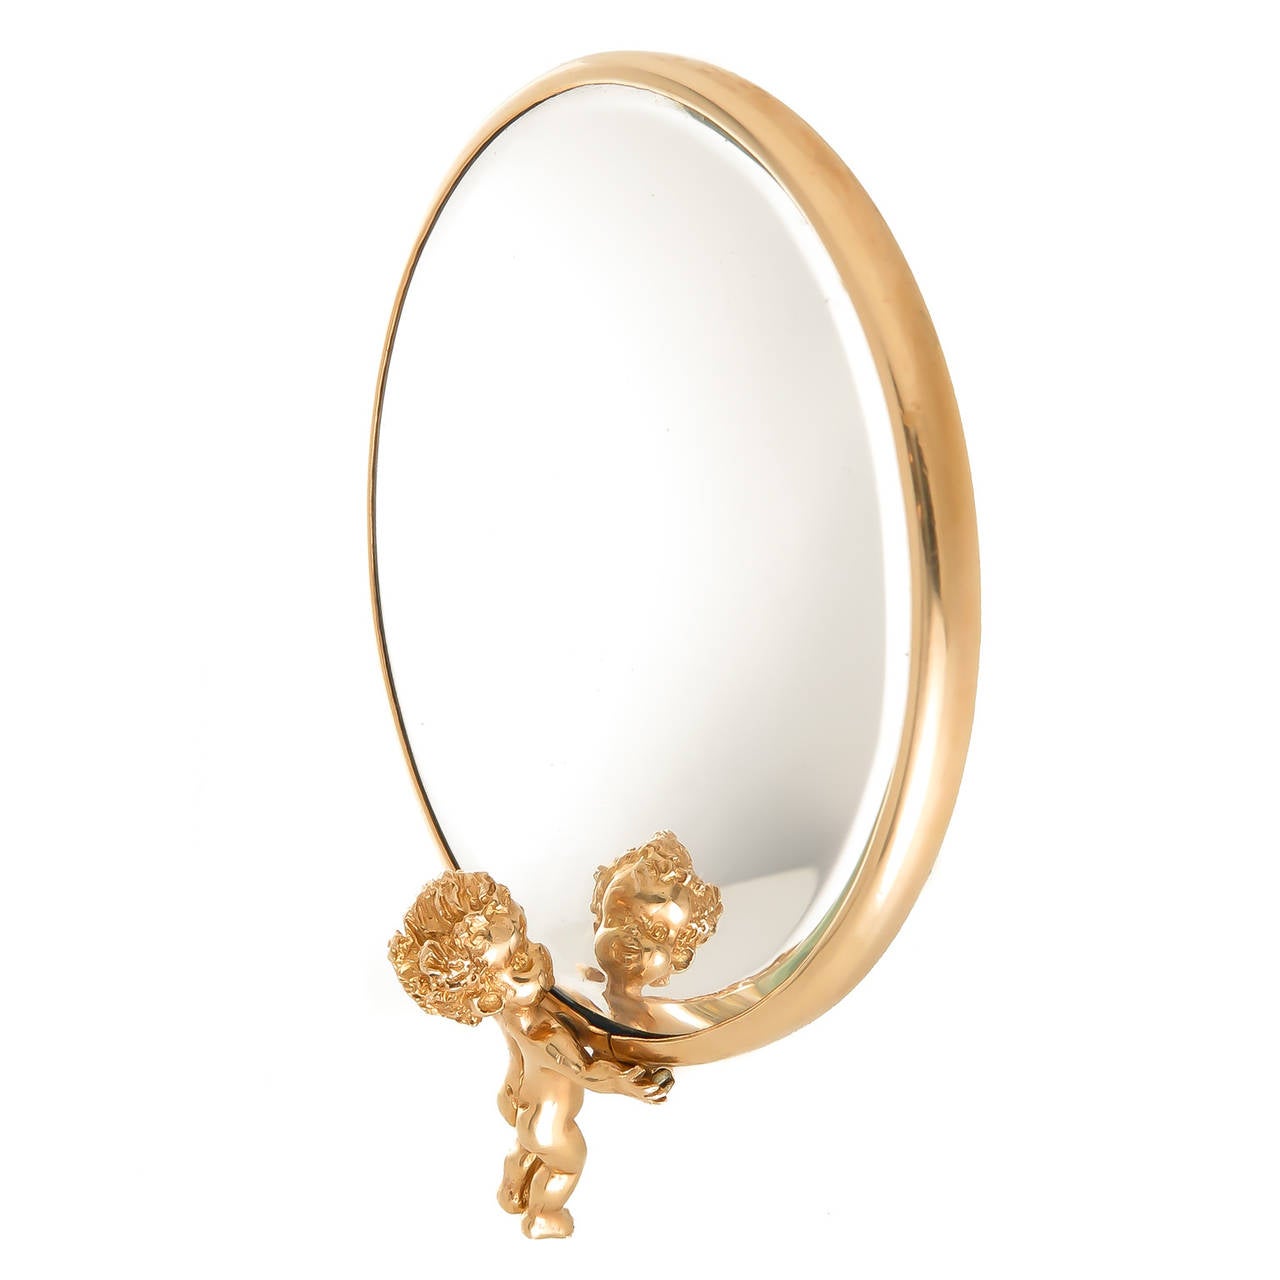 Circa 1960s Ruser 14K yellow Gold Evening Bag Mirror, 2 sided with a beveled Mirror and a very cute, figural and detailed baby, a Ruser trade mark looking at his own reflection in the mirror. Measuring 2 3/4 inch in diameter with the Baby figure